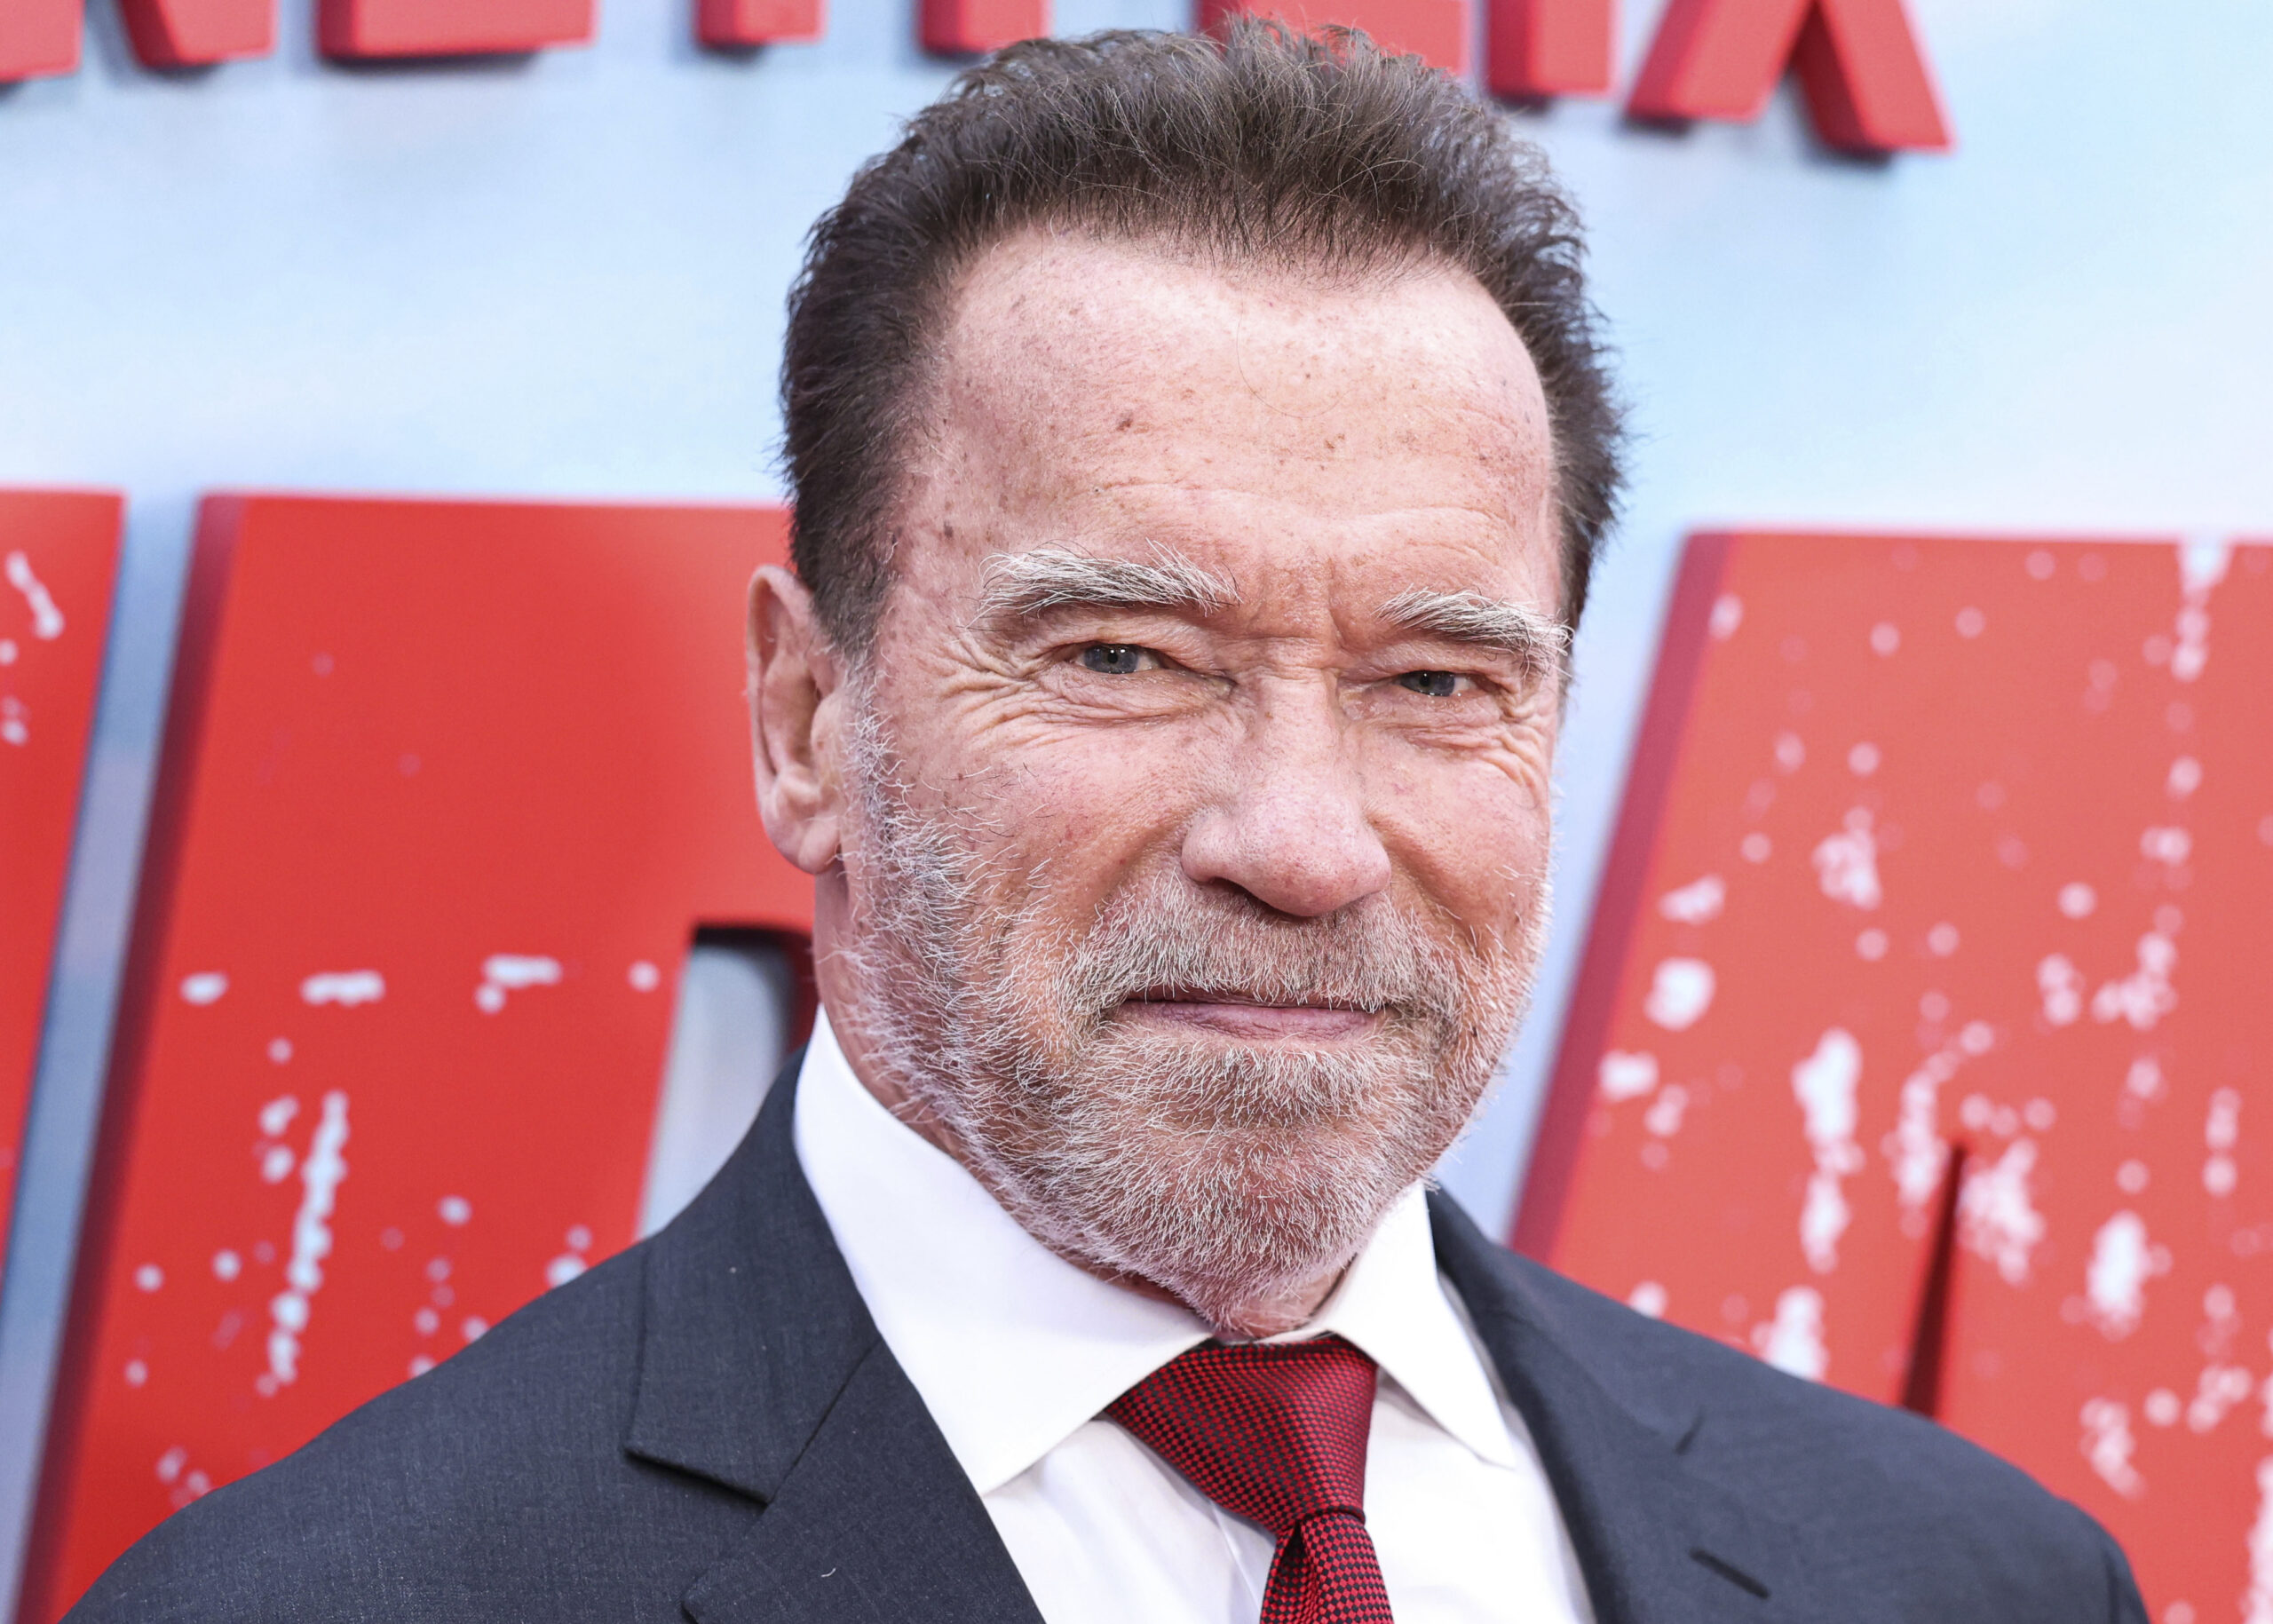 Arnold Schwarzenegger Detained at Airport Over Expensive Watch: ‘An Incompetent Shakedown’